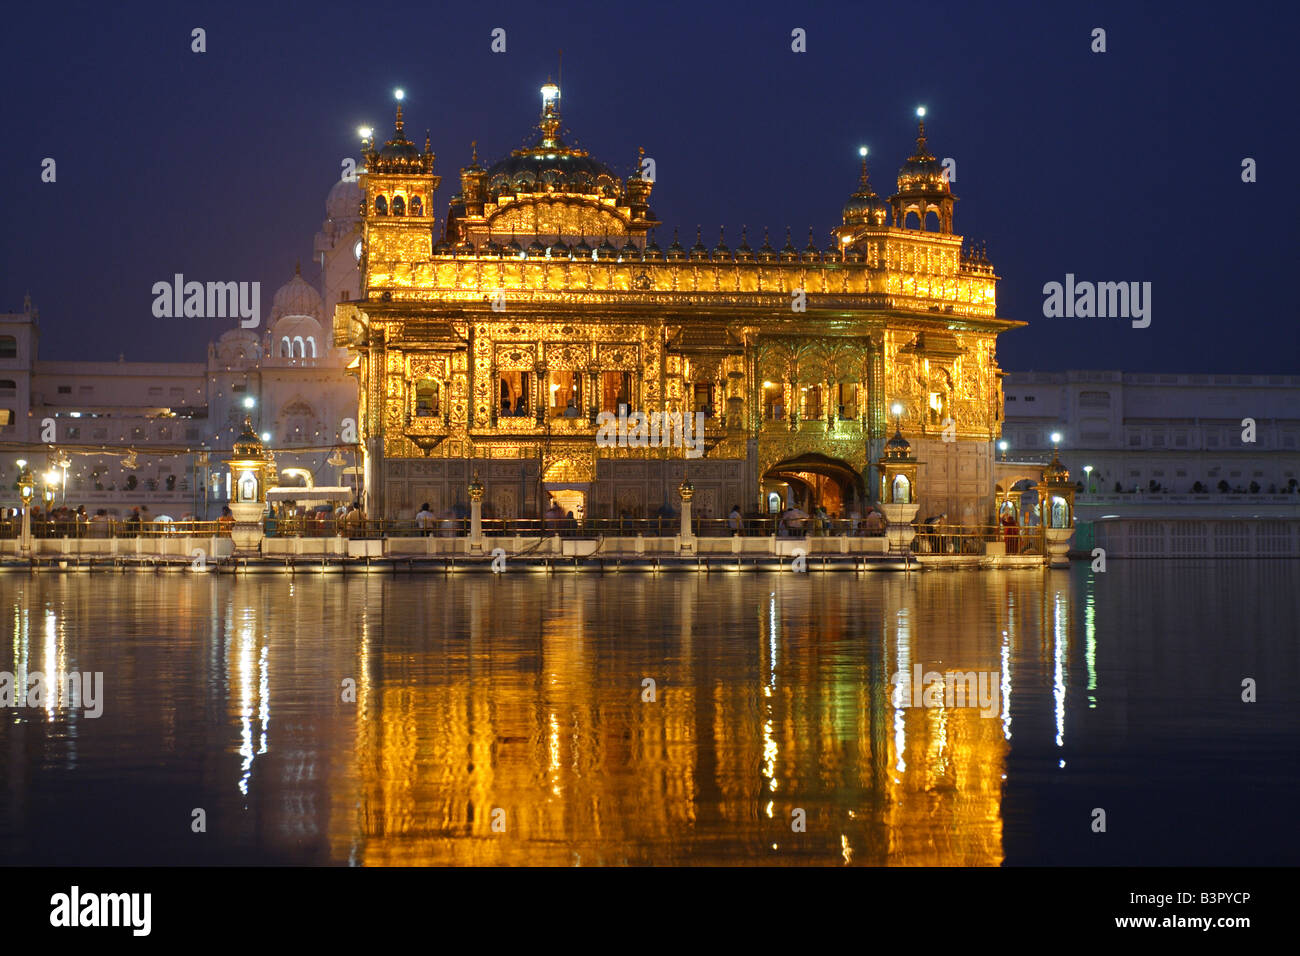 Golden_Temple_by_night_Amritsar_India-B3